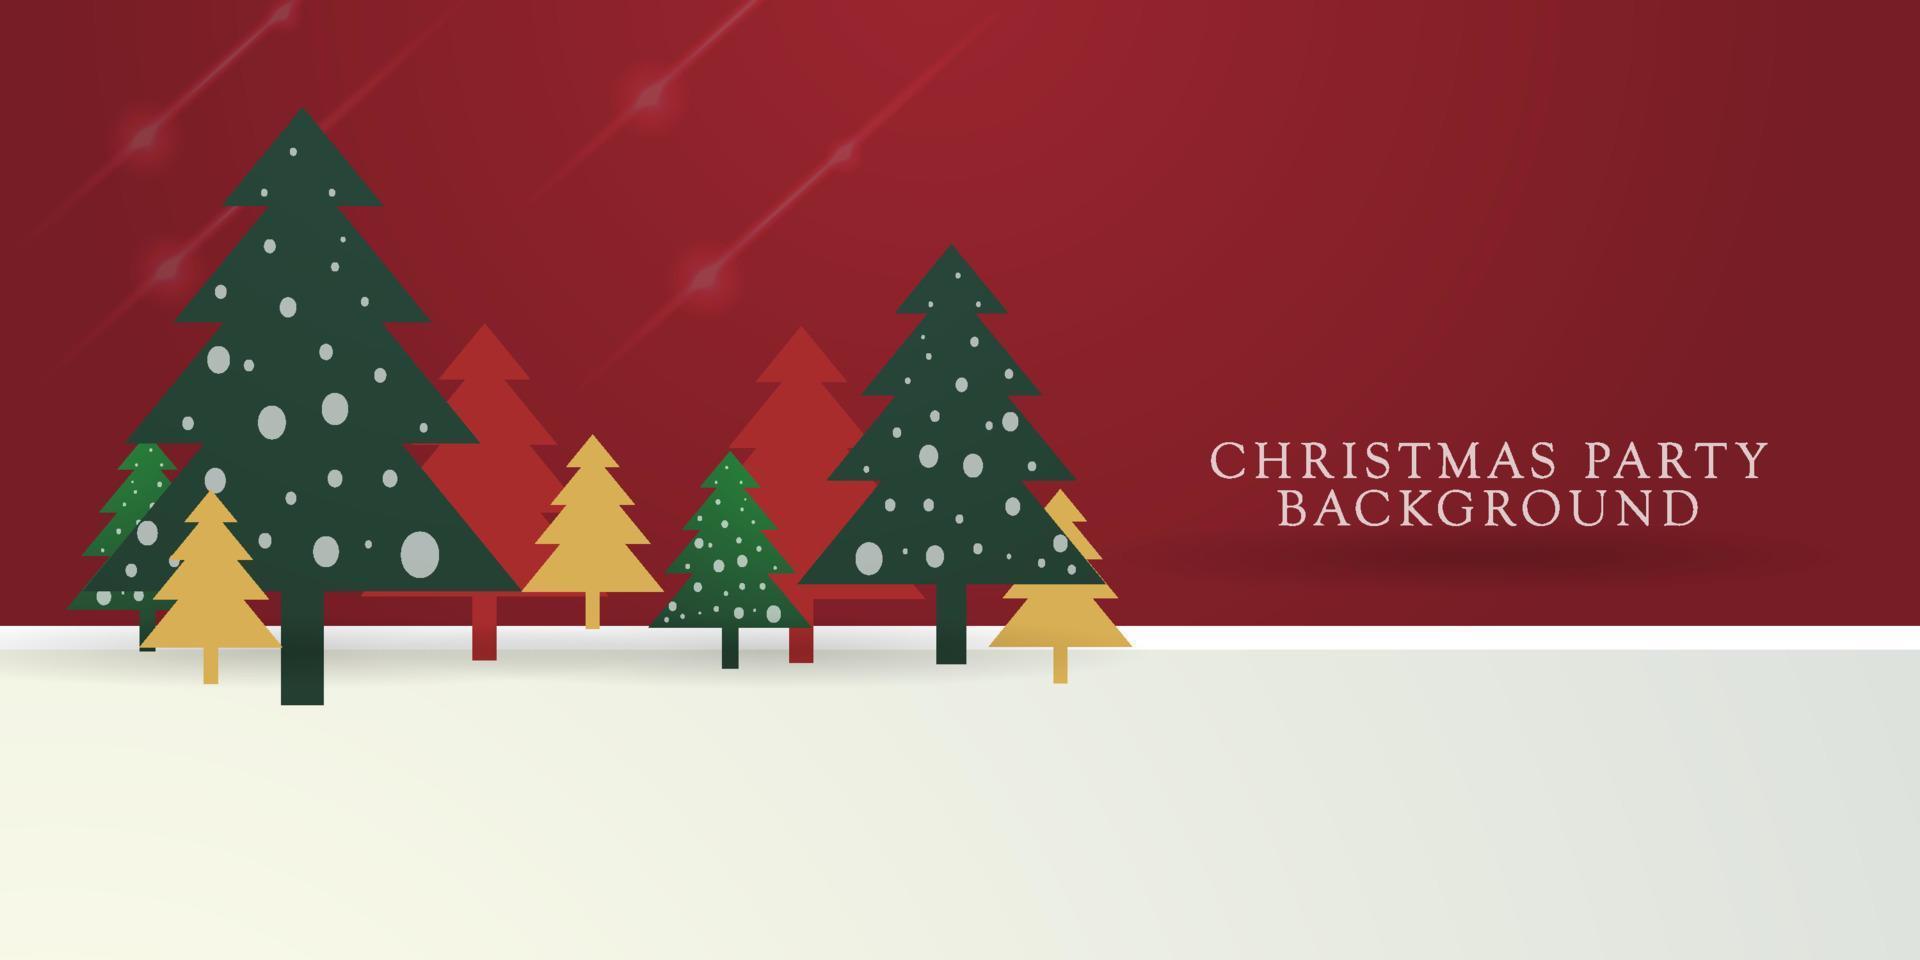 Christmas banner. Xmas Horizontal composition made of red and white wooden and glass Christmas trees. Christmas poster, greeting cards, header or profile cover.Eps10 vector